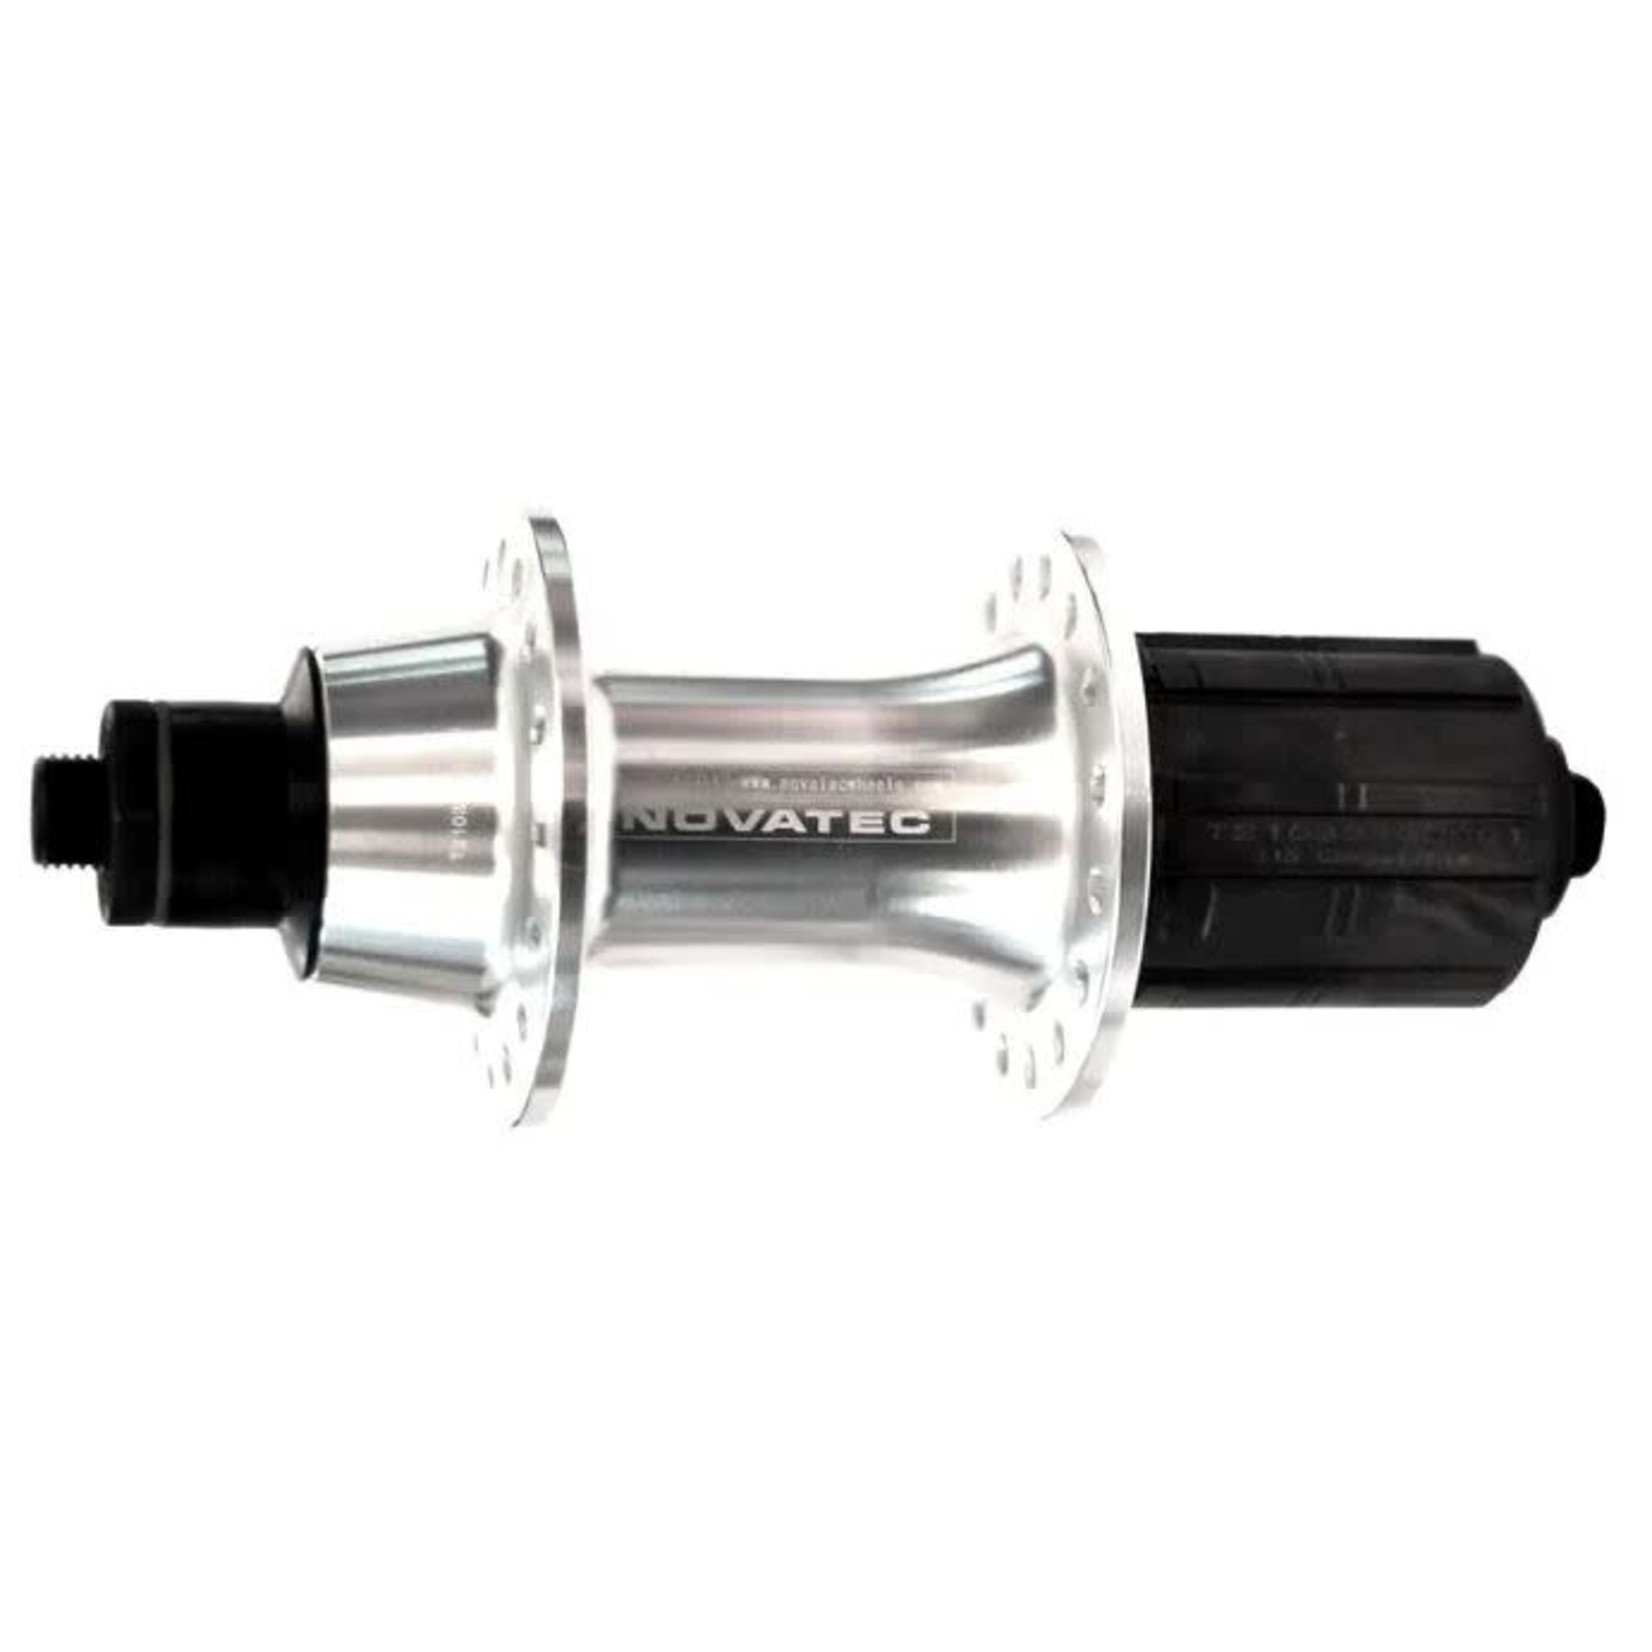 Novatec Novatec Bicycle Quick Release Hub - 8/10/11 Speed 32H (130mm Old) Silver